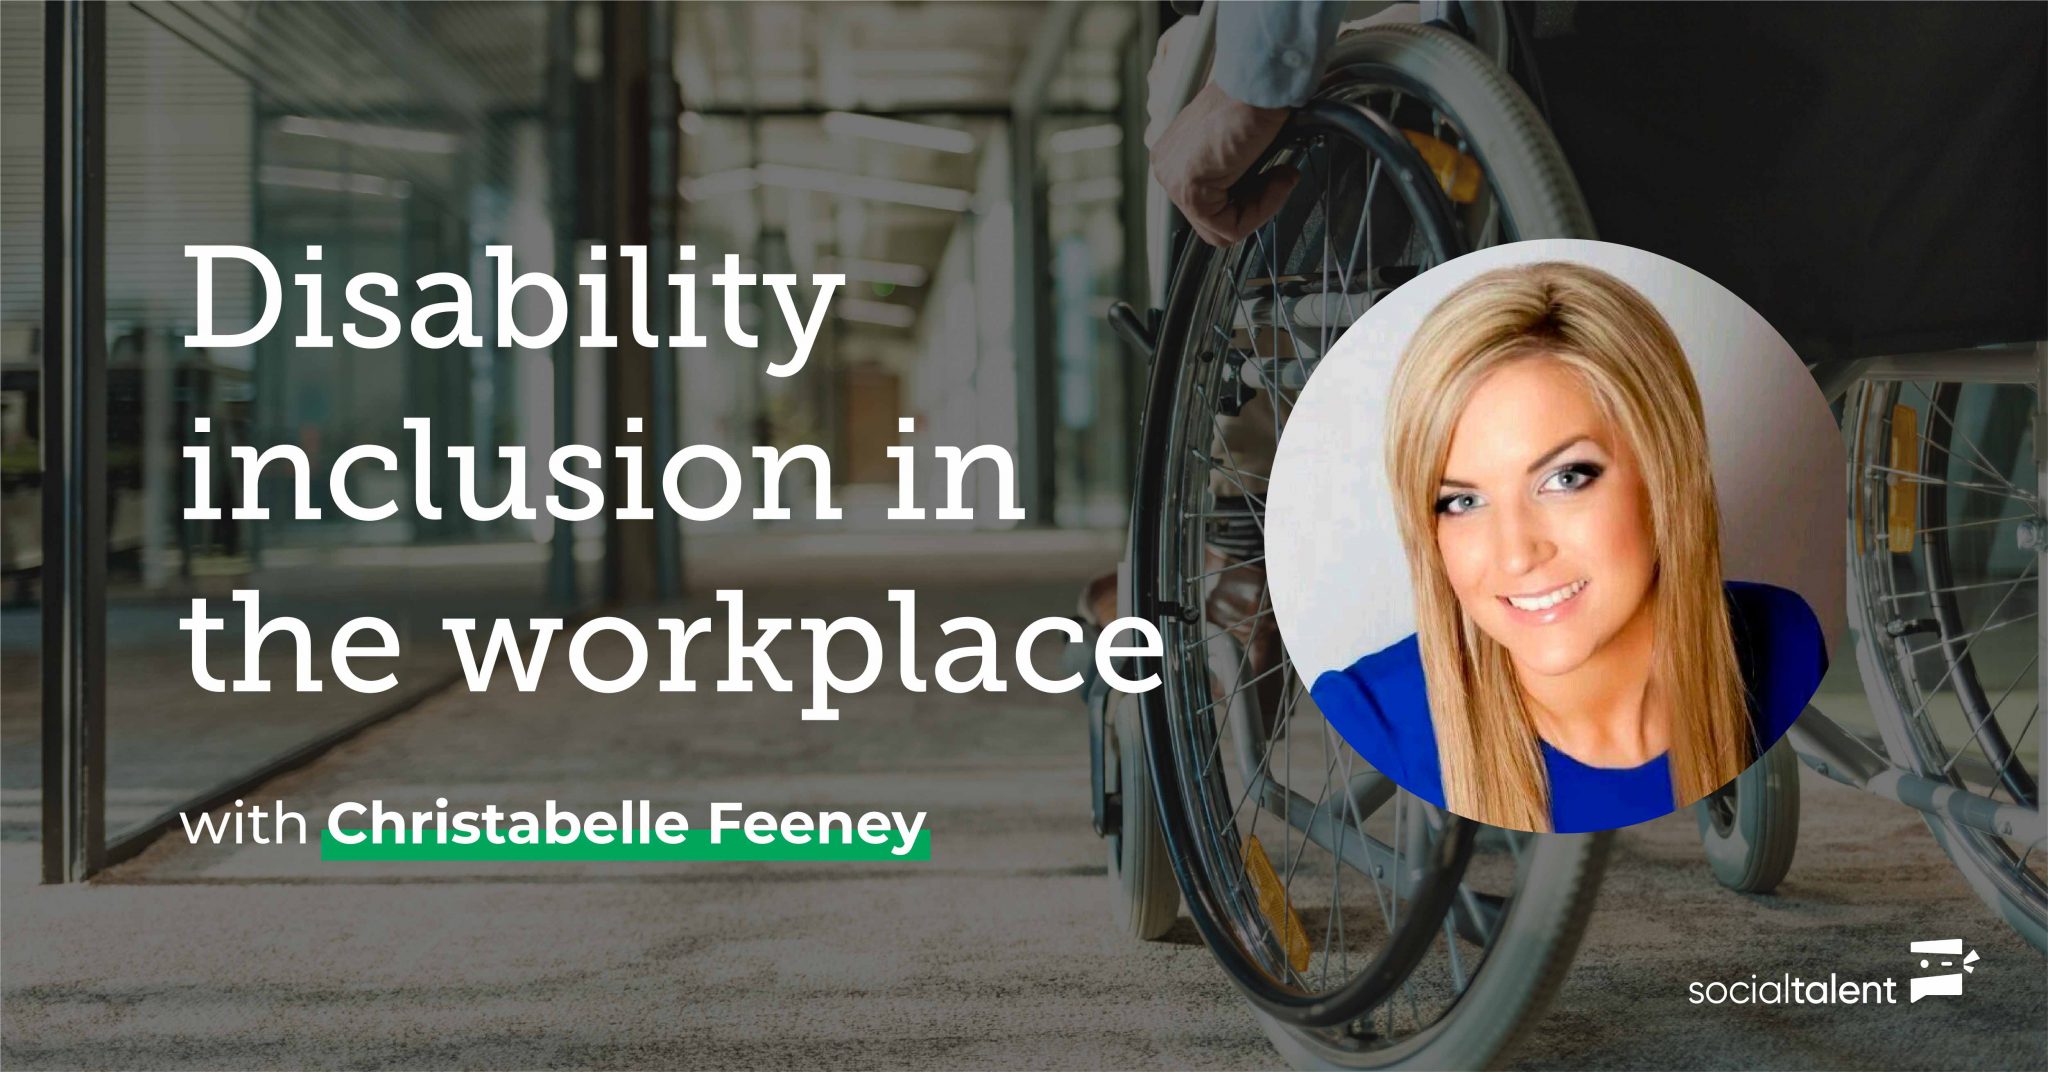 Disability inclusion in the workplace, with Christabelle Feeney